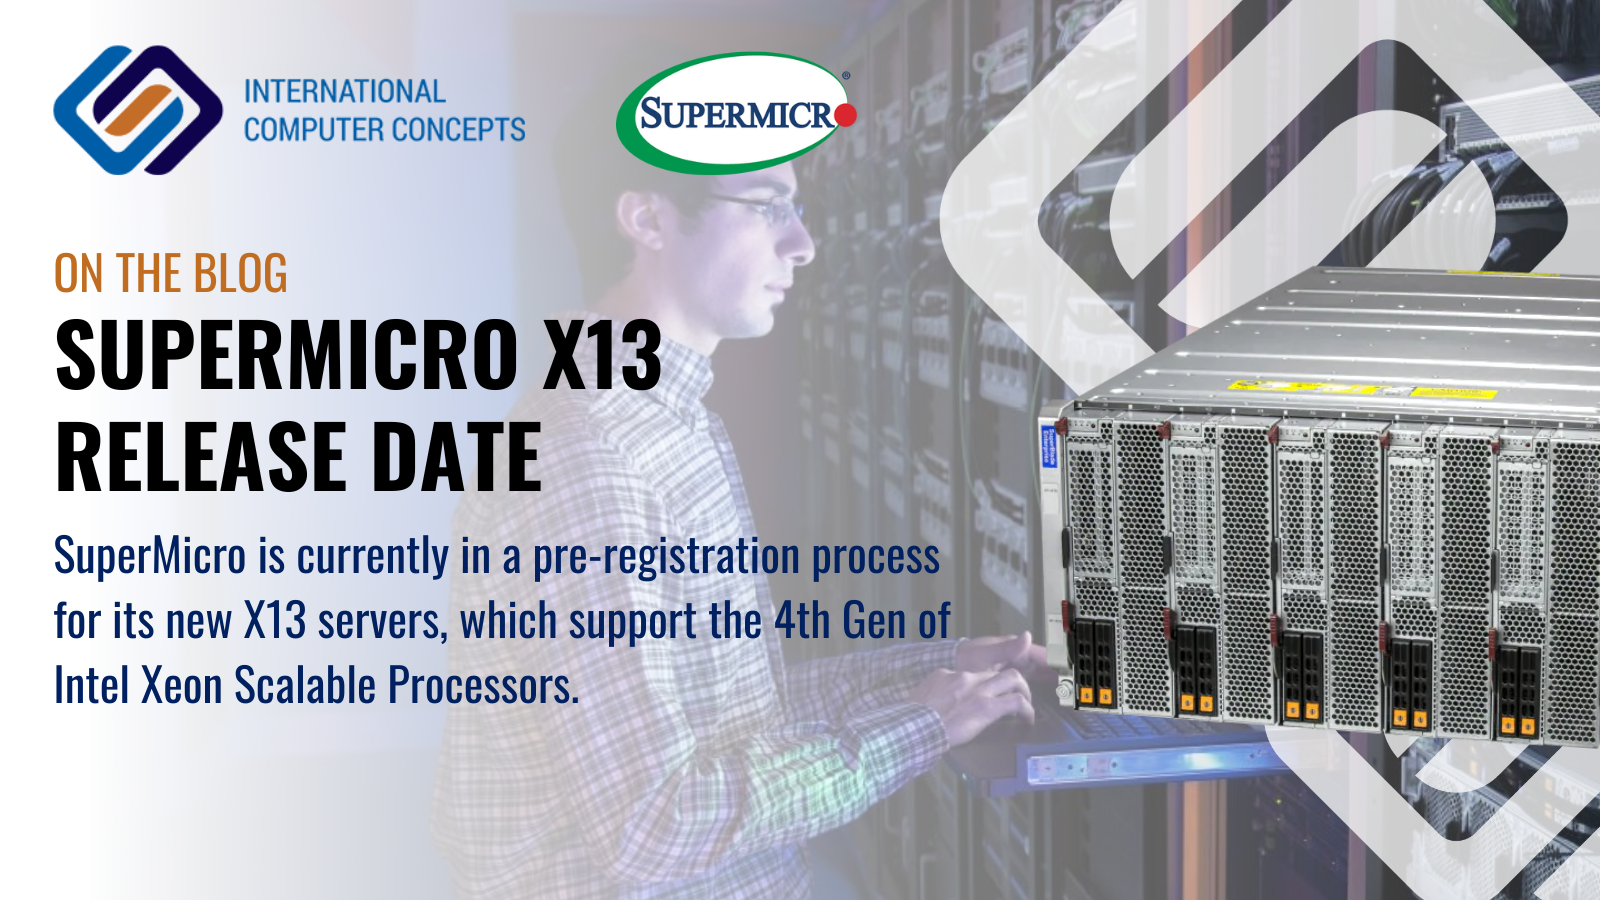 When will SuperMicro release the X13, 4th Gen Intel Xeon Scalable Process servers?